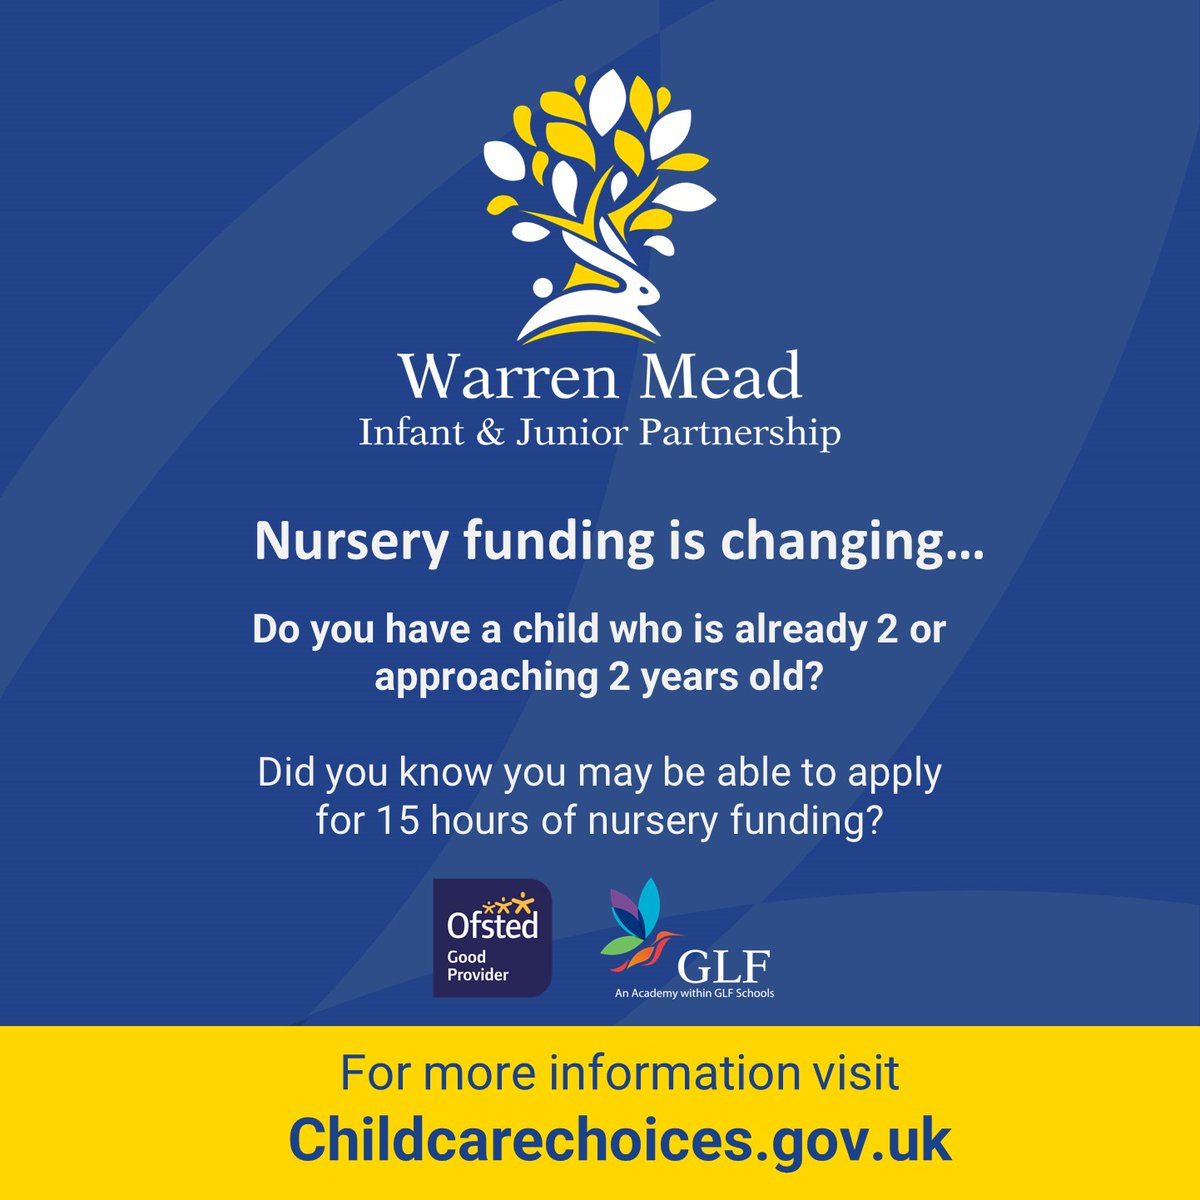 Nursery funding is changing! If you have a child who is 2 or approaching 2 years old, you may be able to apply for 15 hours of nursery funding. If you would like to have a tour of Warren Mead Nursery, click the link in our bio!